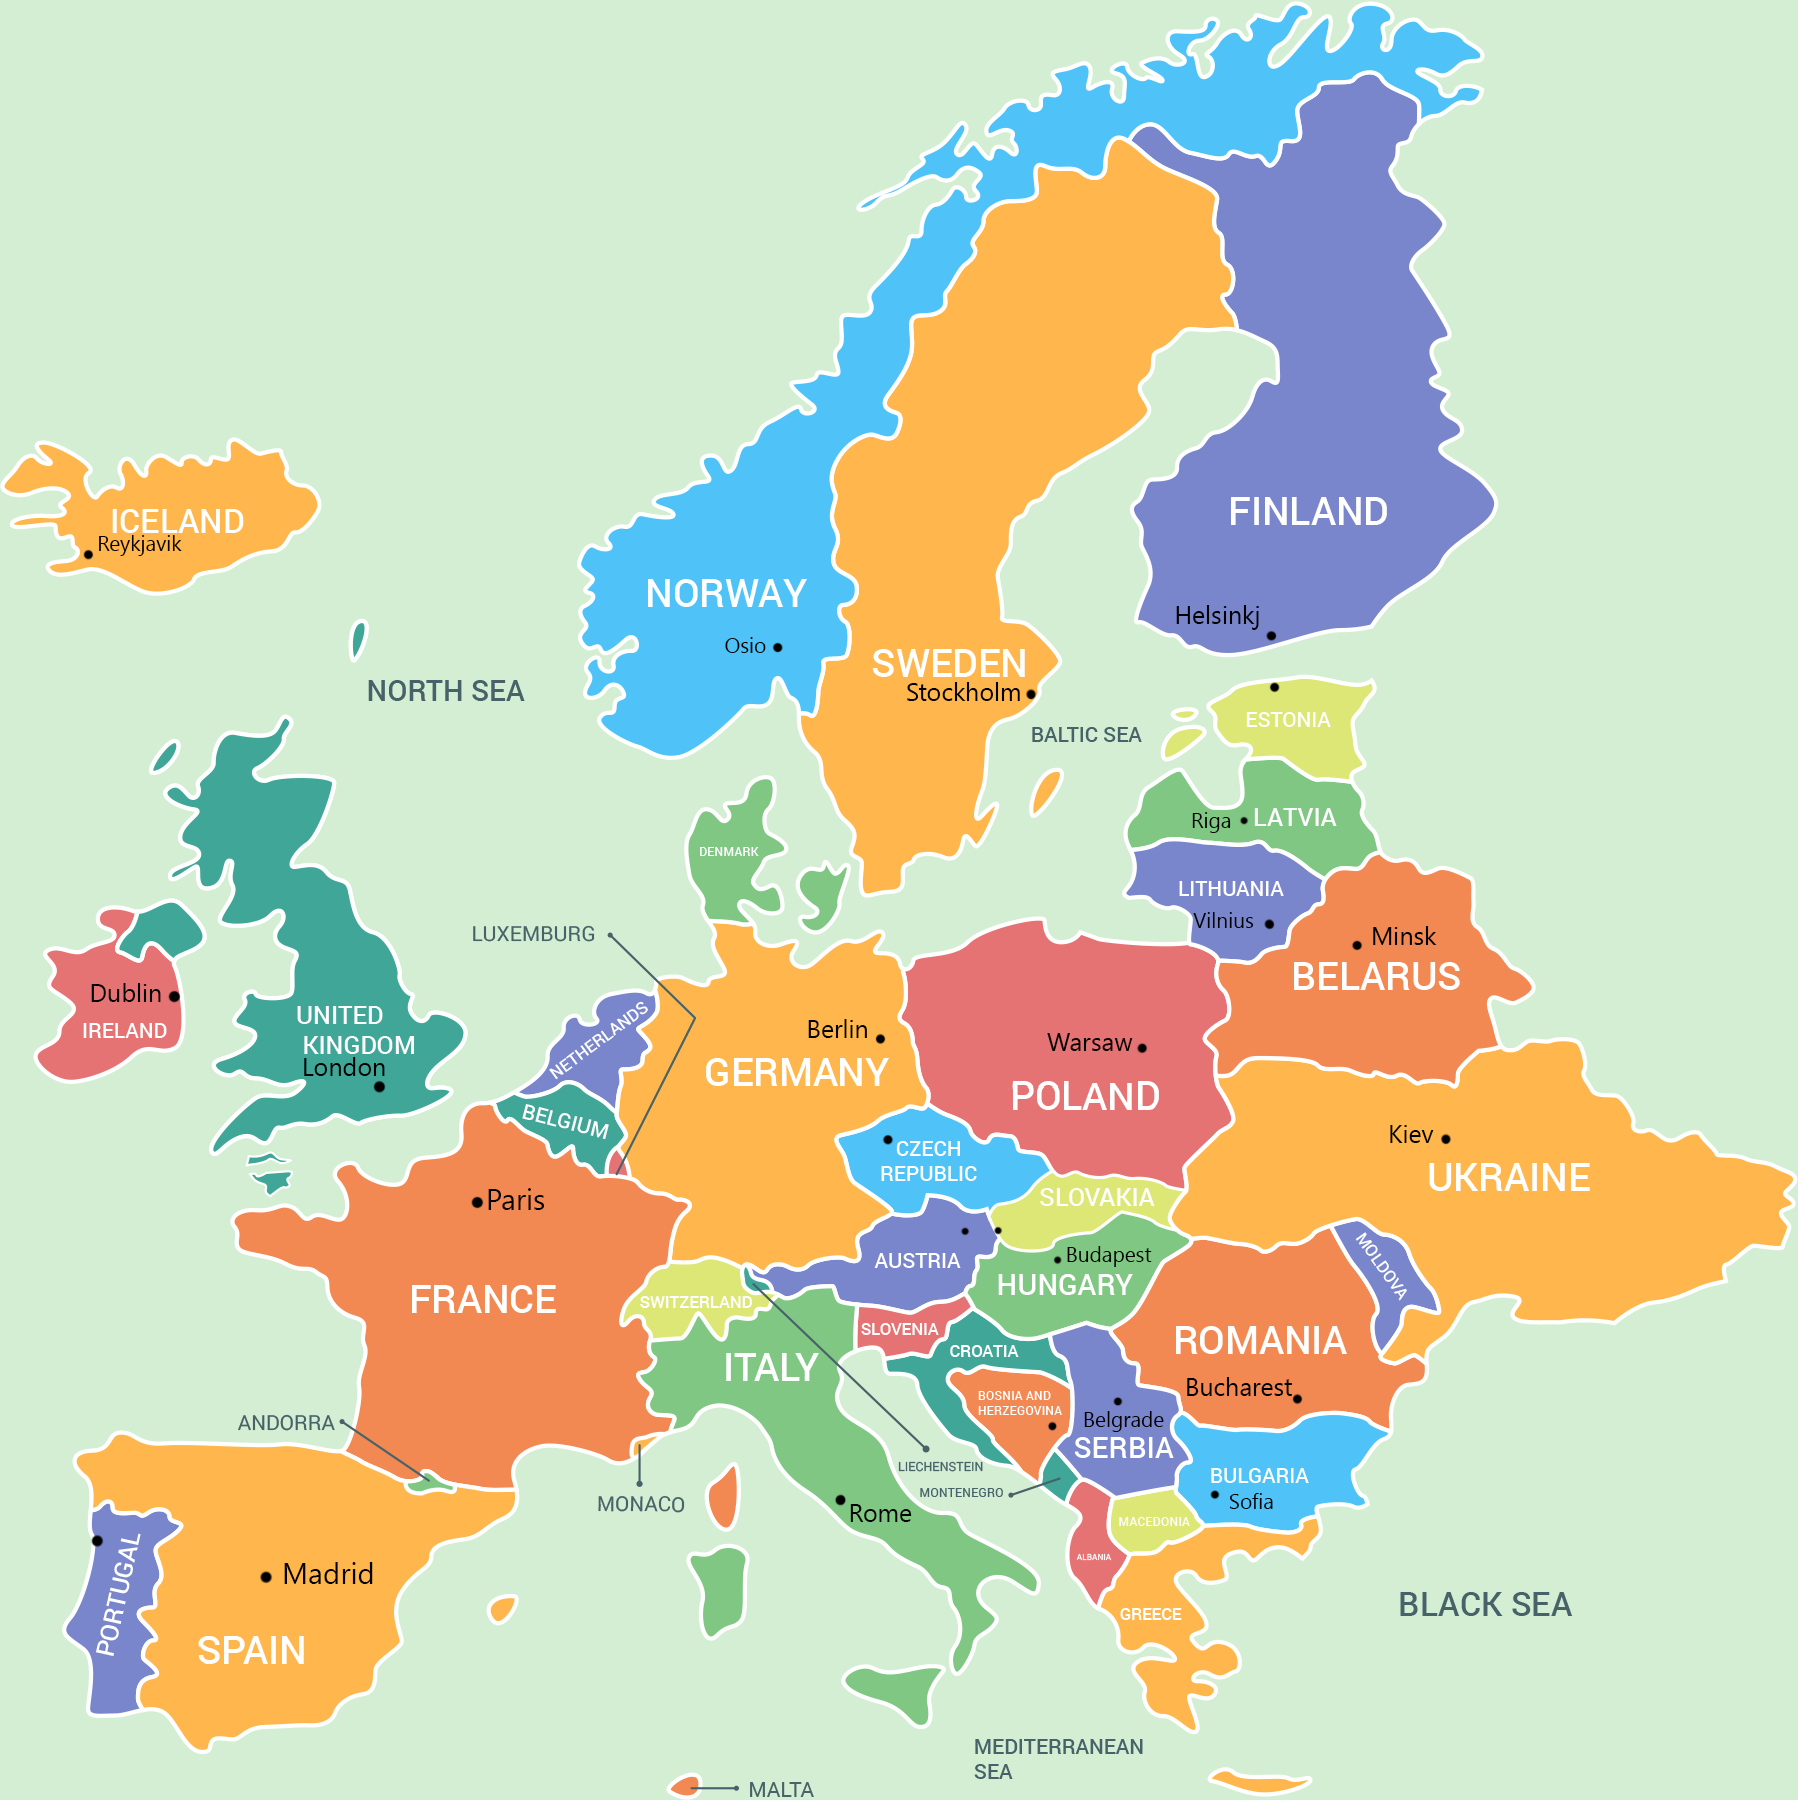 Map Of Europe With Countries And Capitals Labeled Beautiful World Map